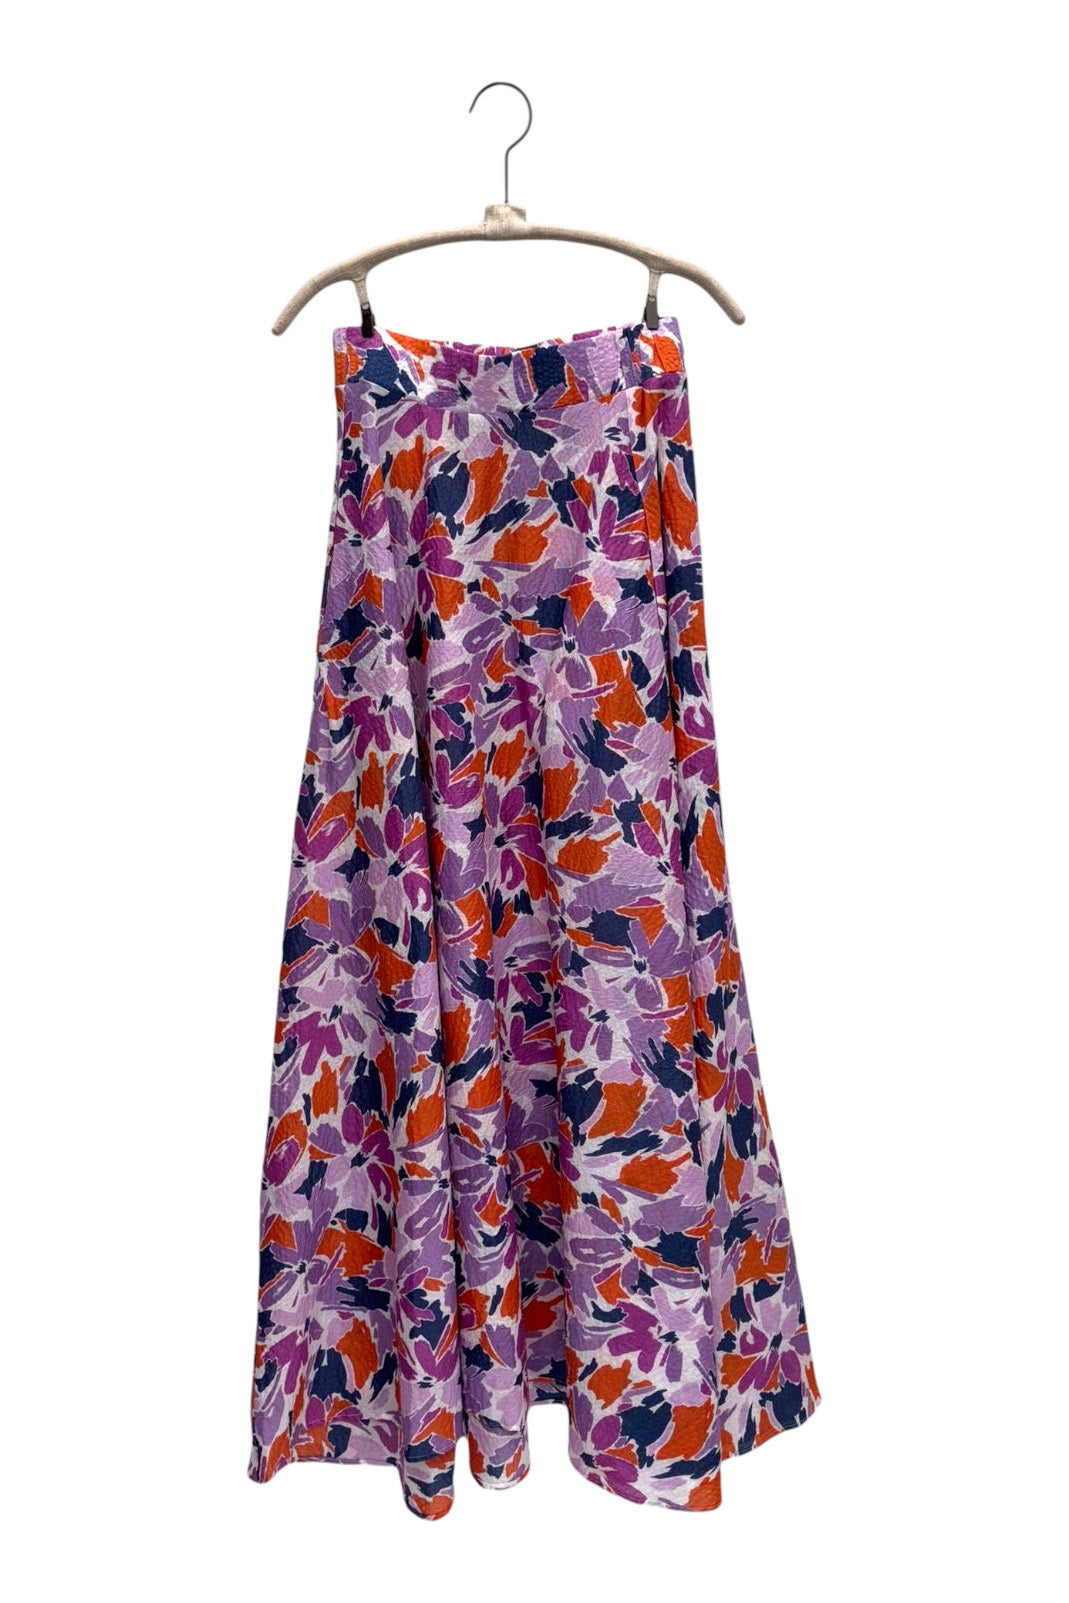 A Shirt Thing Lola Floral Skirt in Lavender Navy